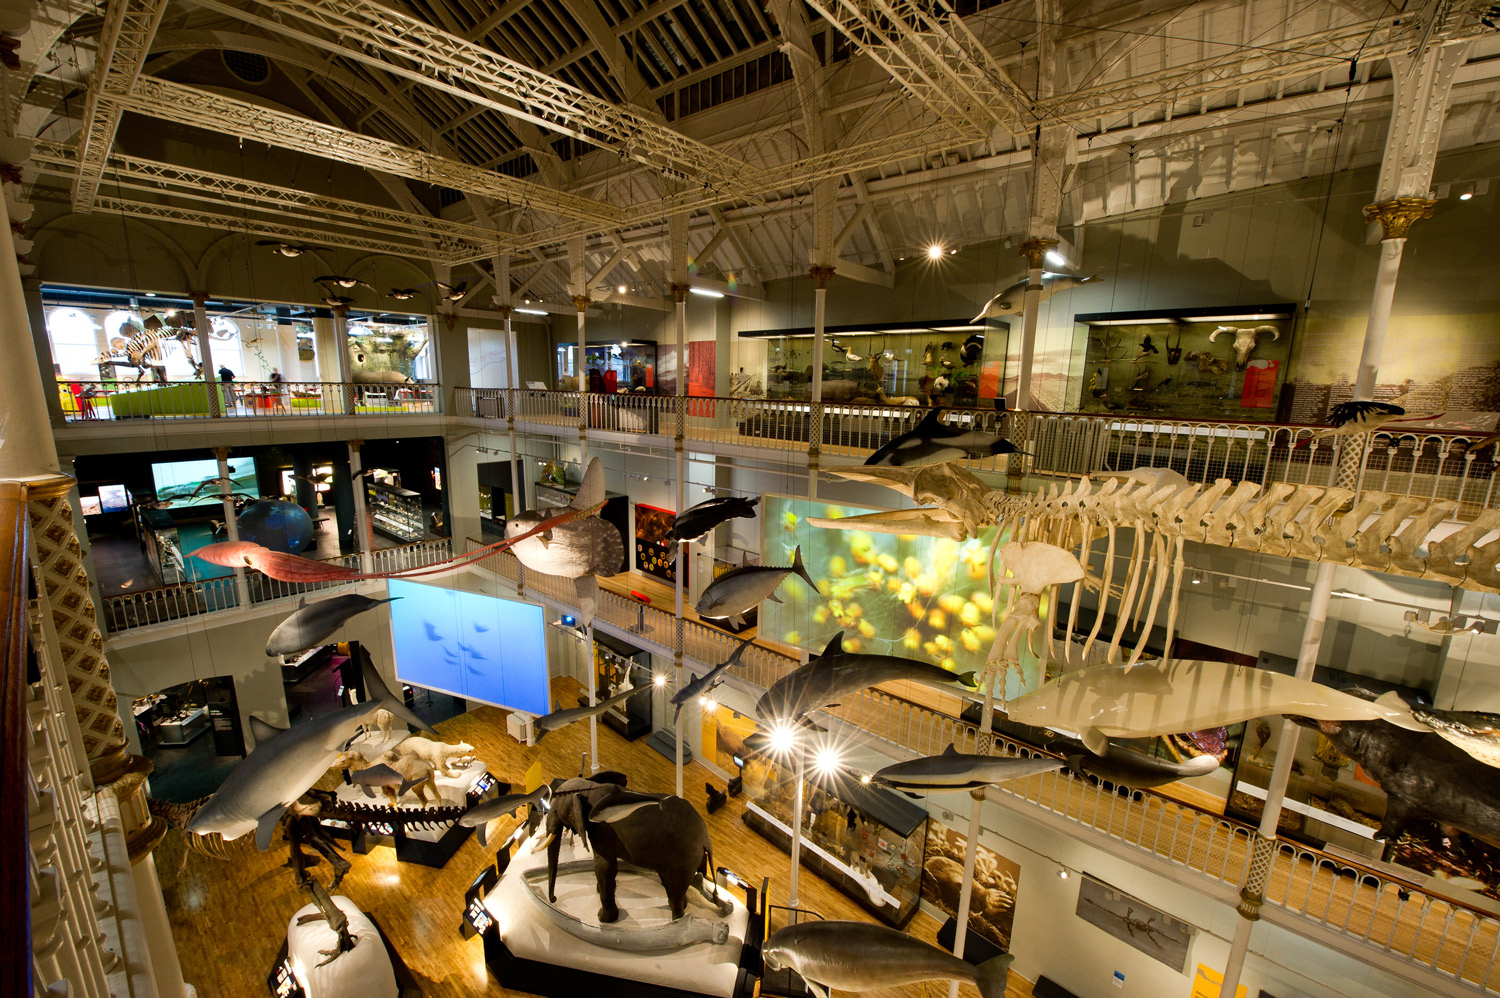 The Animal World gallery at the National Museum of Scotland.